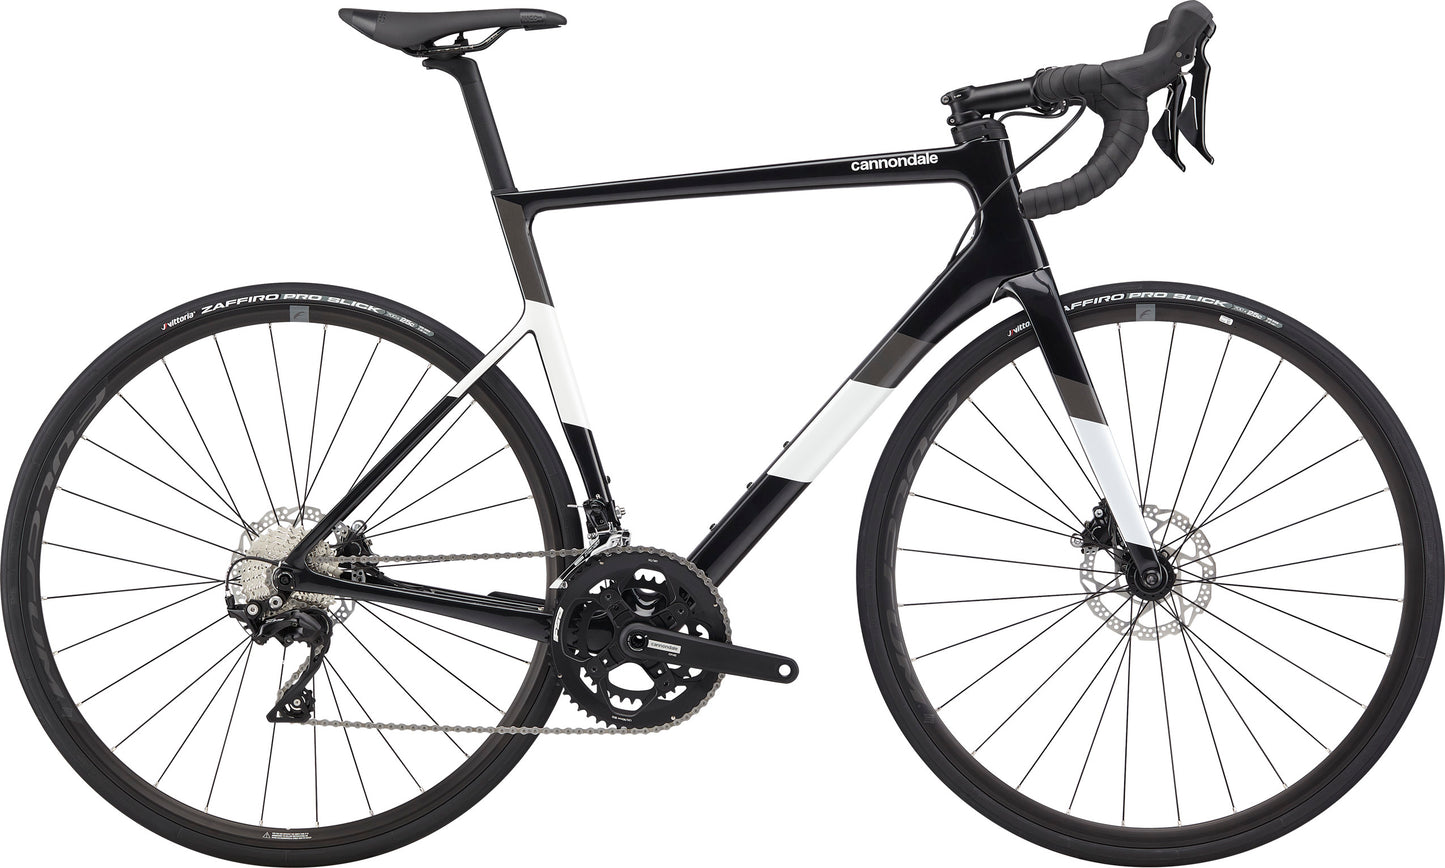 2021 Cannondale 700 M S6 EVO Crb Disc 105